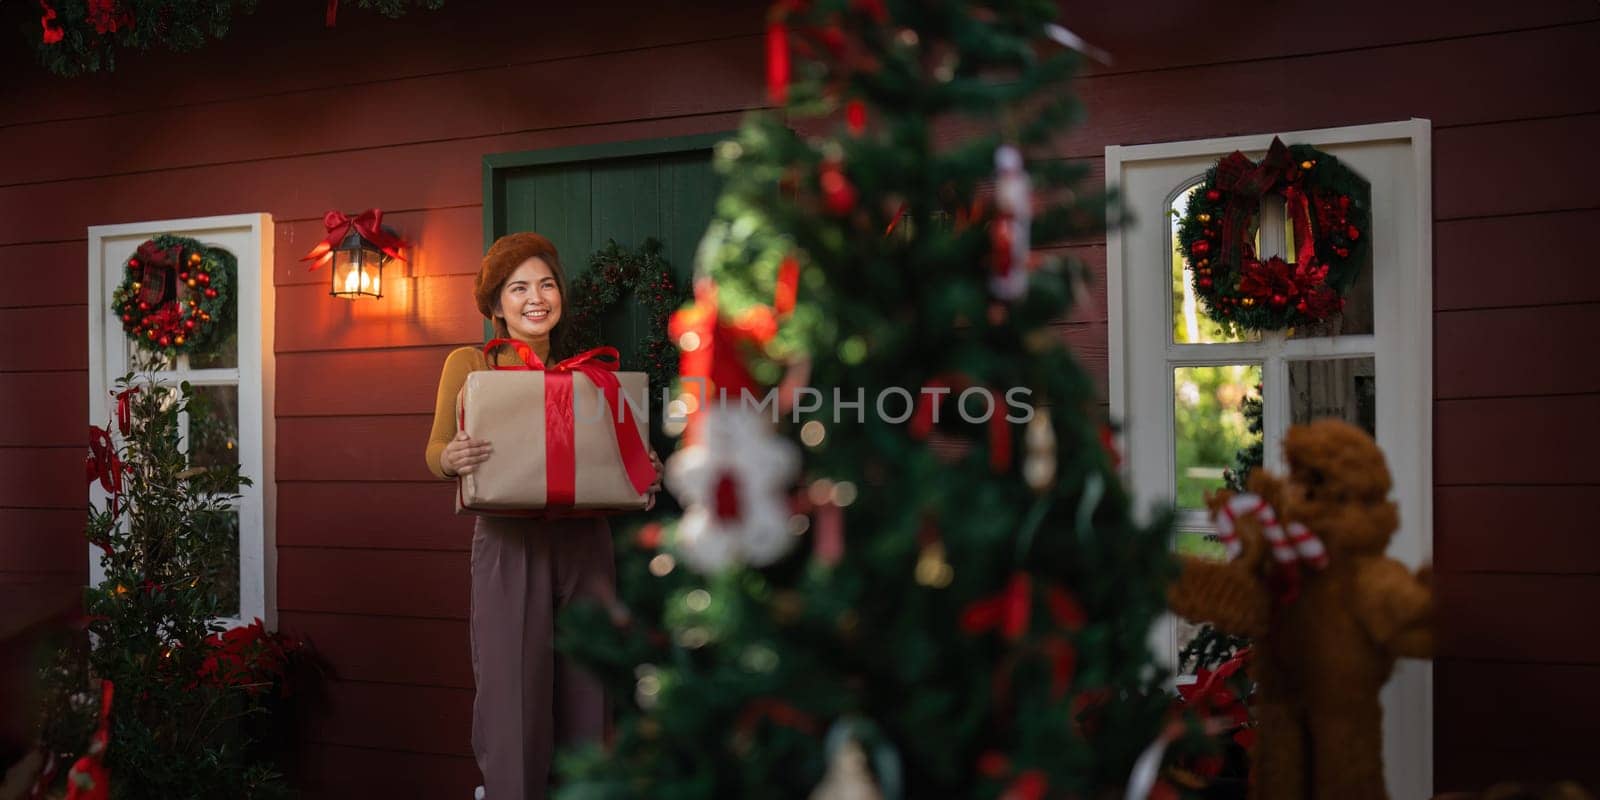 Happy woman wearing Santa hat holding of gift box. Positive emotional Santa girl. with a beautifully decorated Christmas tree serving as the background. festive Xmas concept.